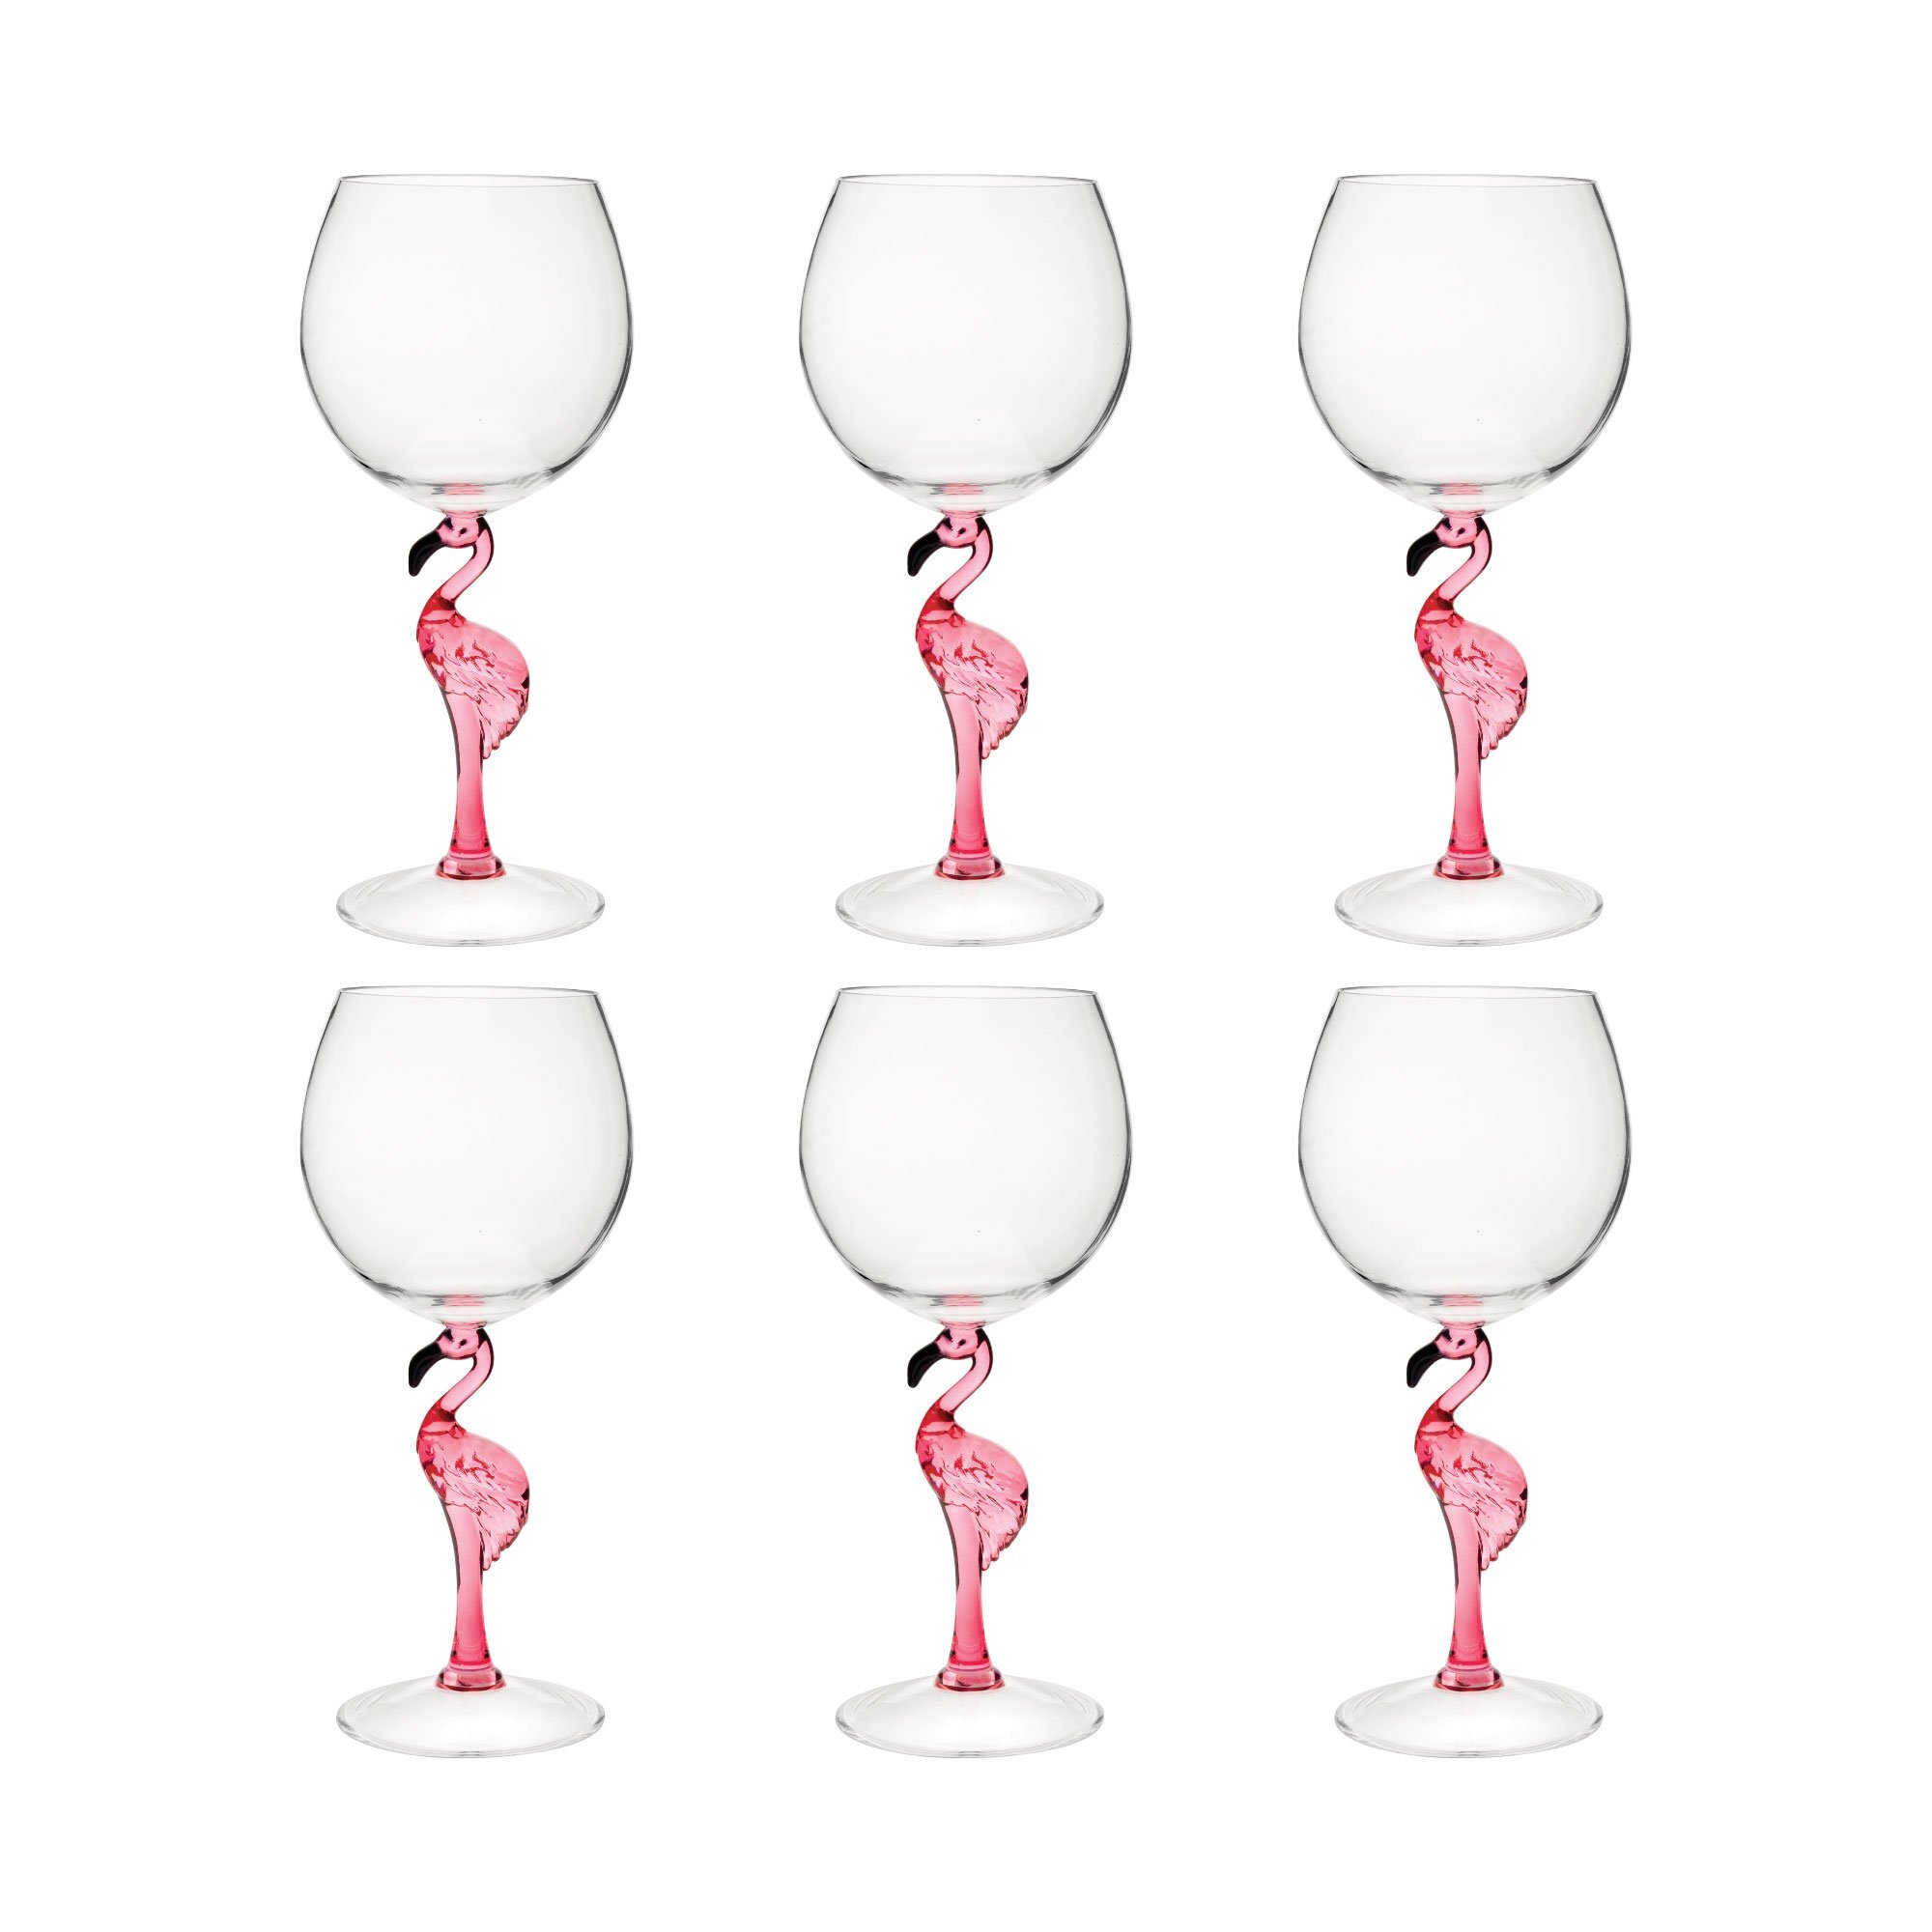 Durable Acrylic FLAMINGO Stem Wine Goblets (4) w/Matching Pitcher Glasses  New